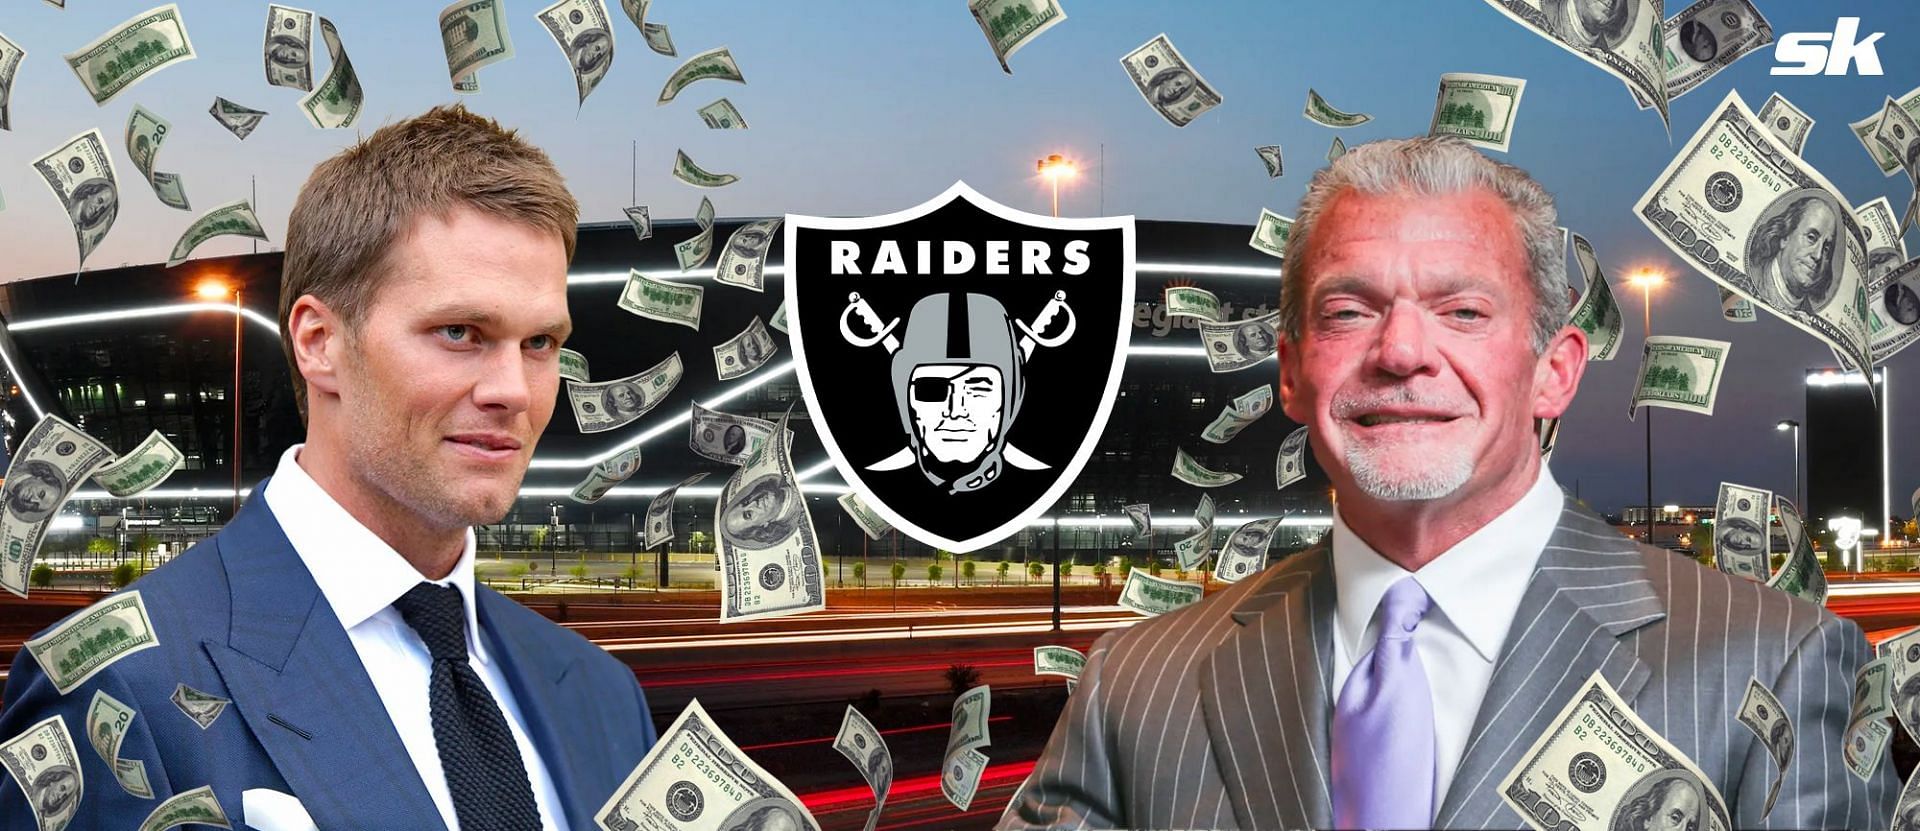 Tom Brady&rsquo;s ownership in $6,200,000,000 Raiders gets fresh update from Colts owner Jim Irsay